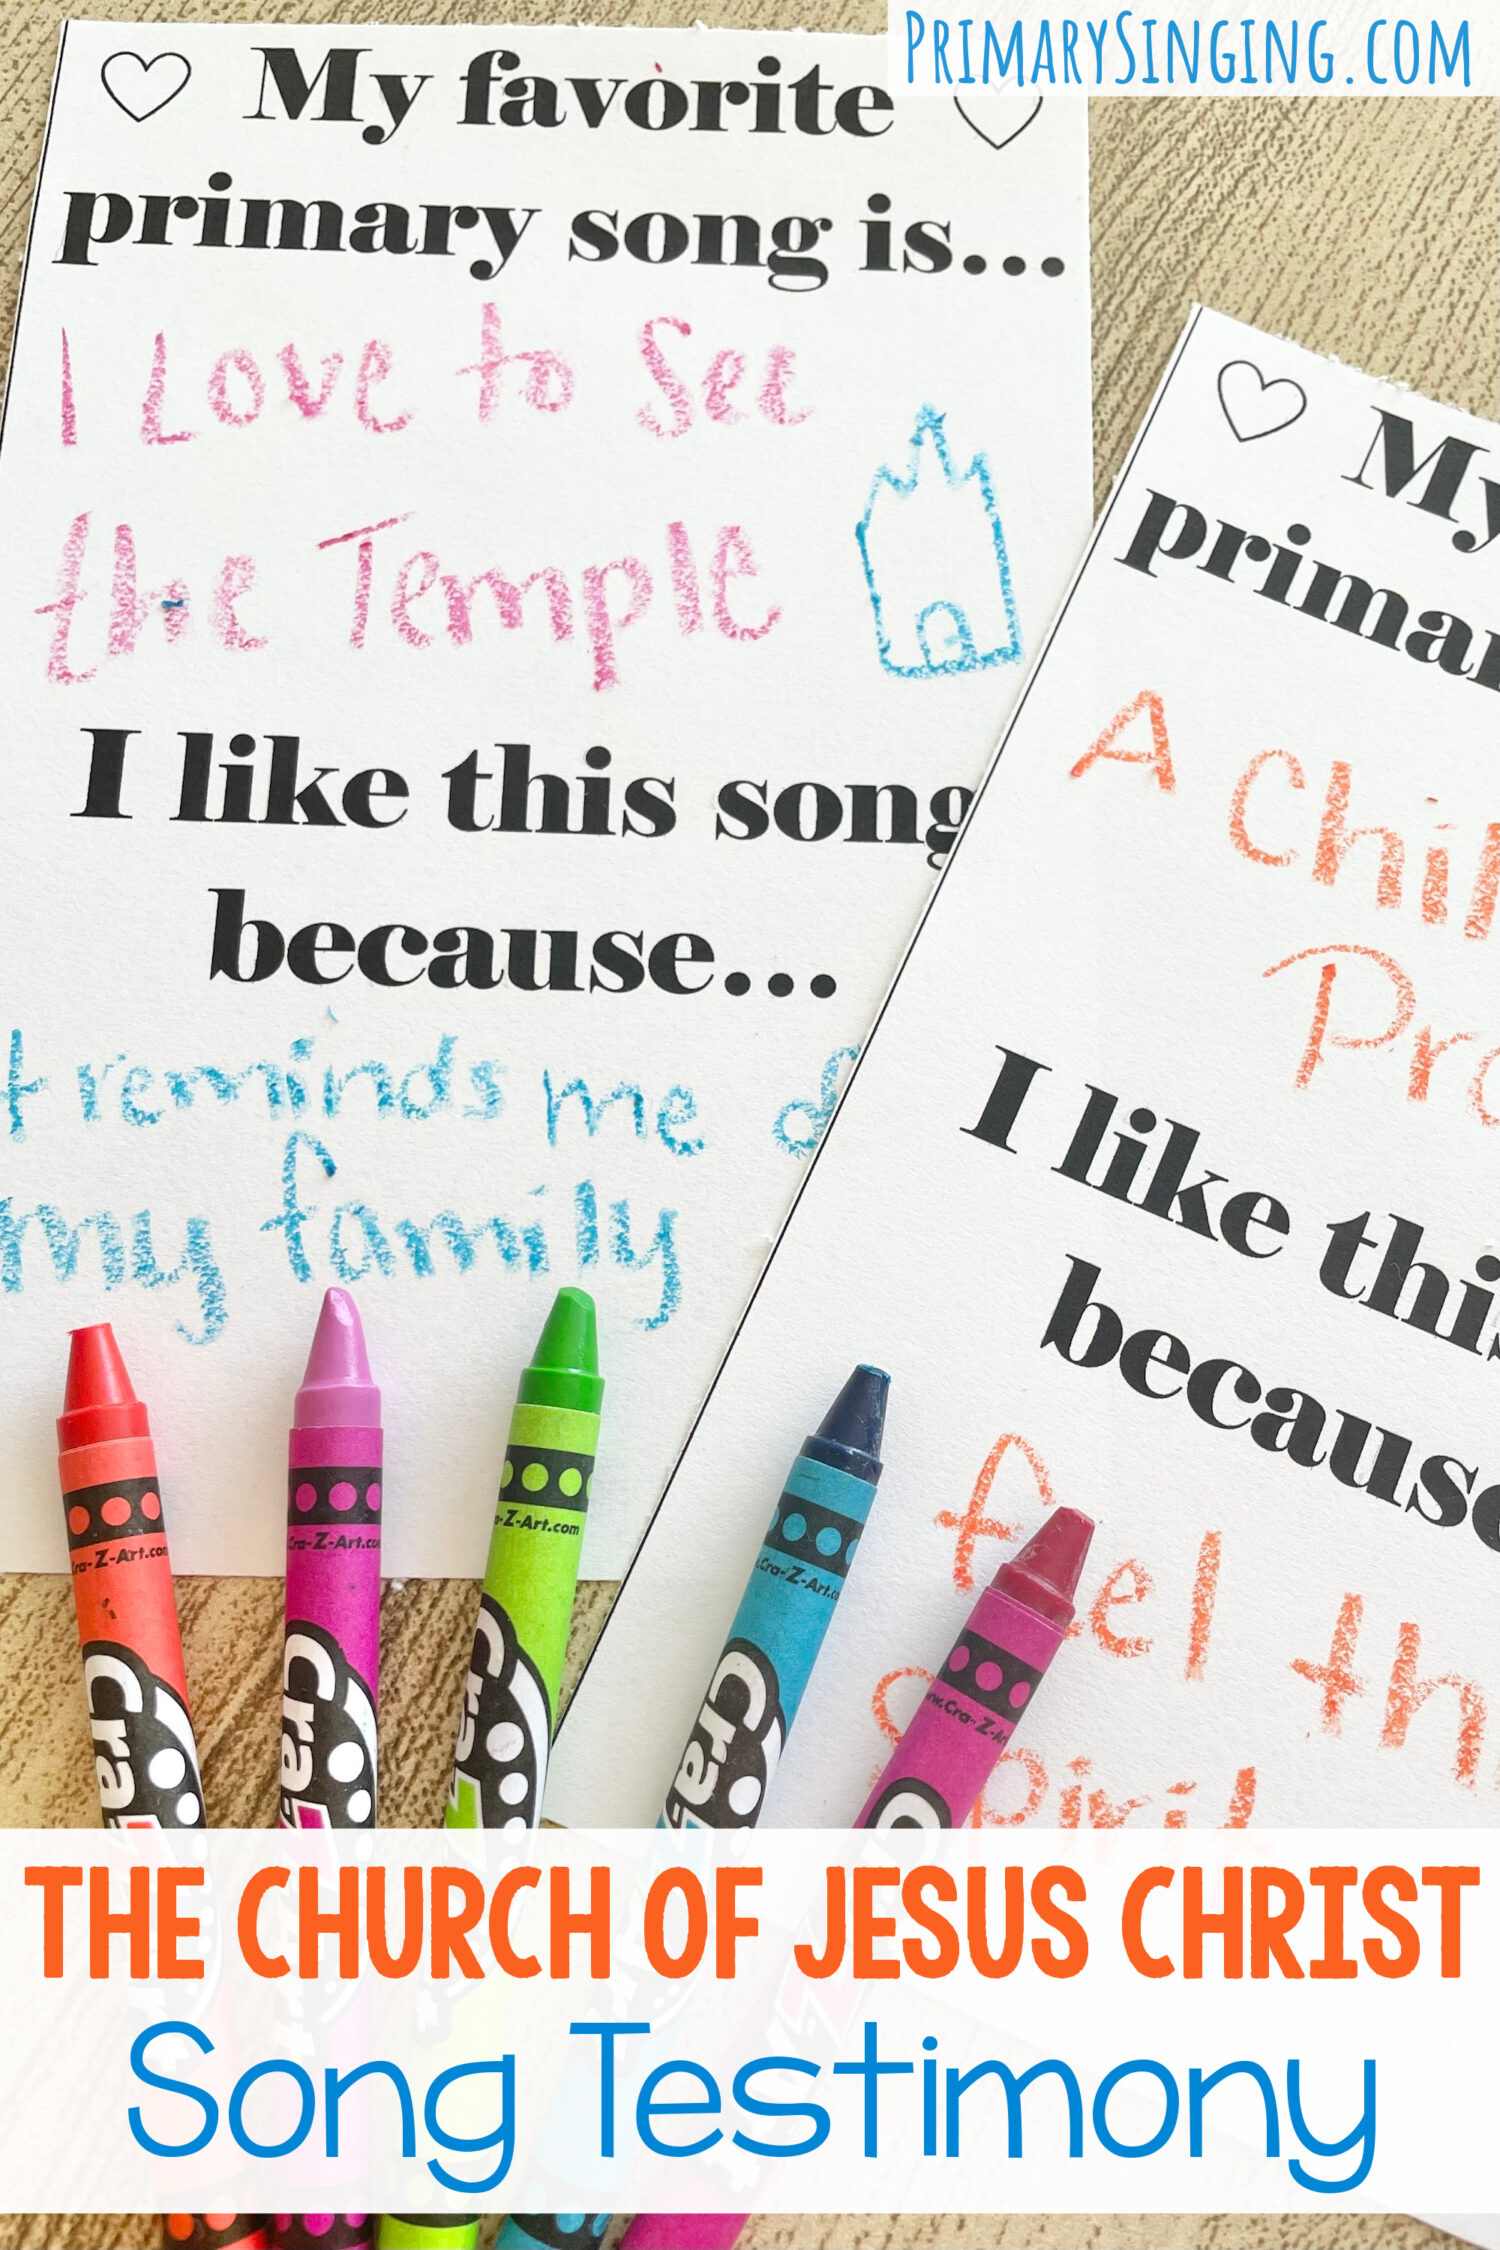 The Church of Jesus Christ Song Testimony - share favorite primary songs and mini-testimonies to review this song. Includes printable song helps for LDS Primary Music Leaders.